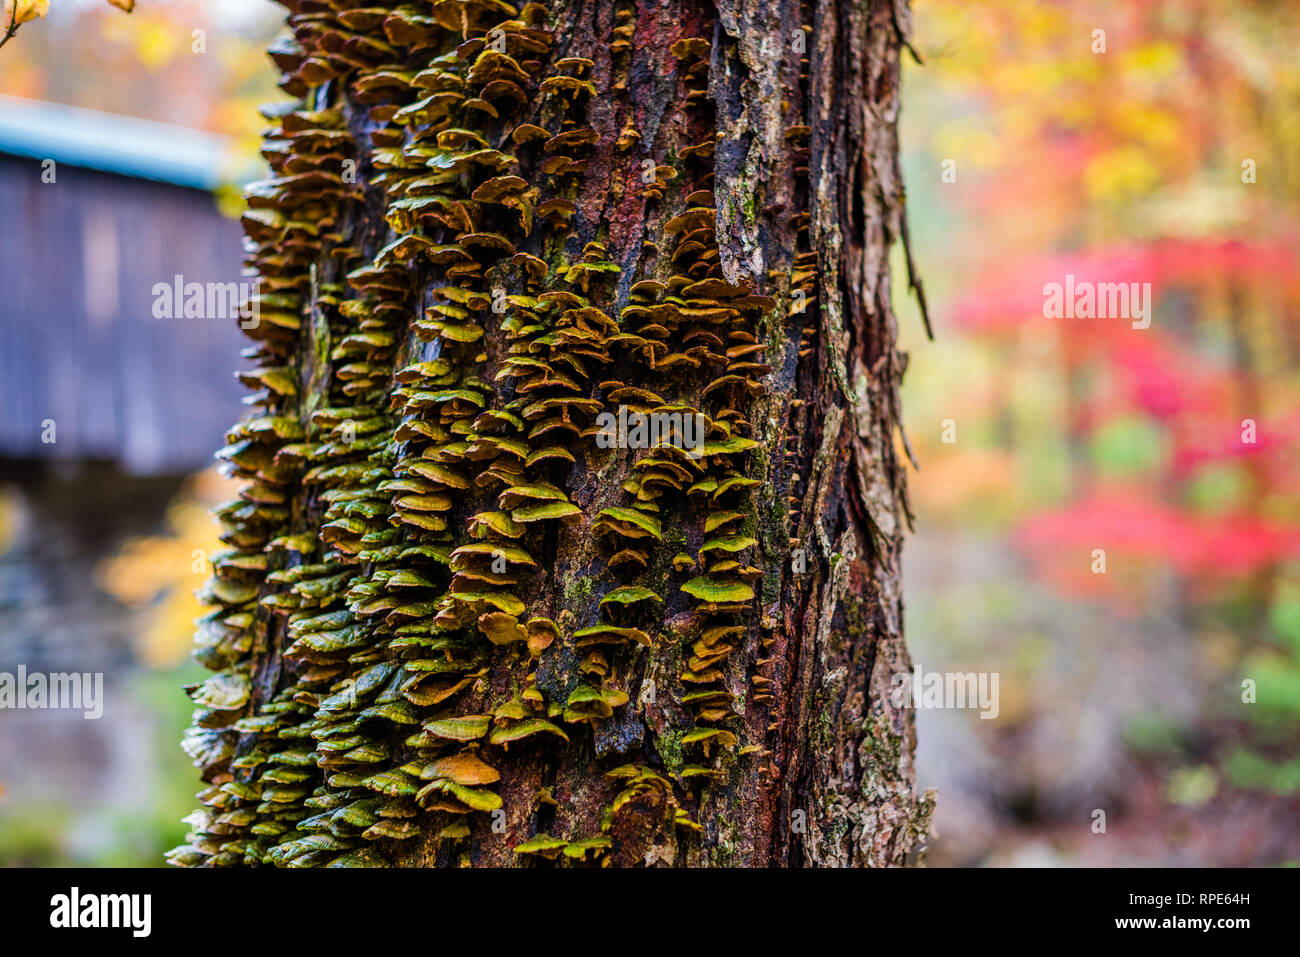 Mushroom growth on tree base by covered bridge in Vermont during Fall Season Stock Photo